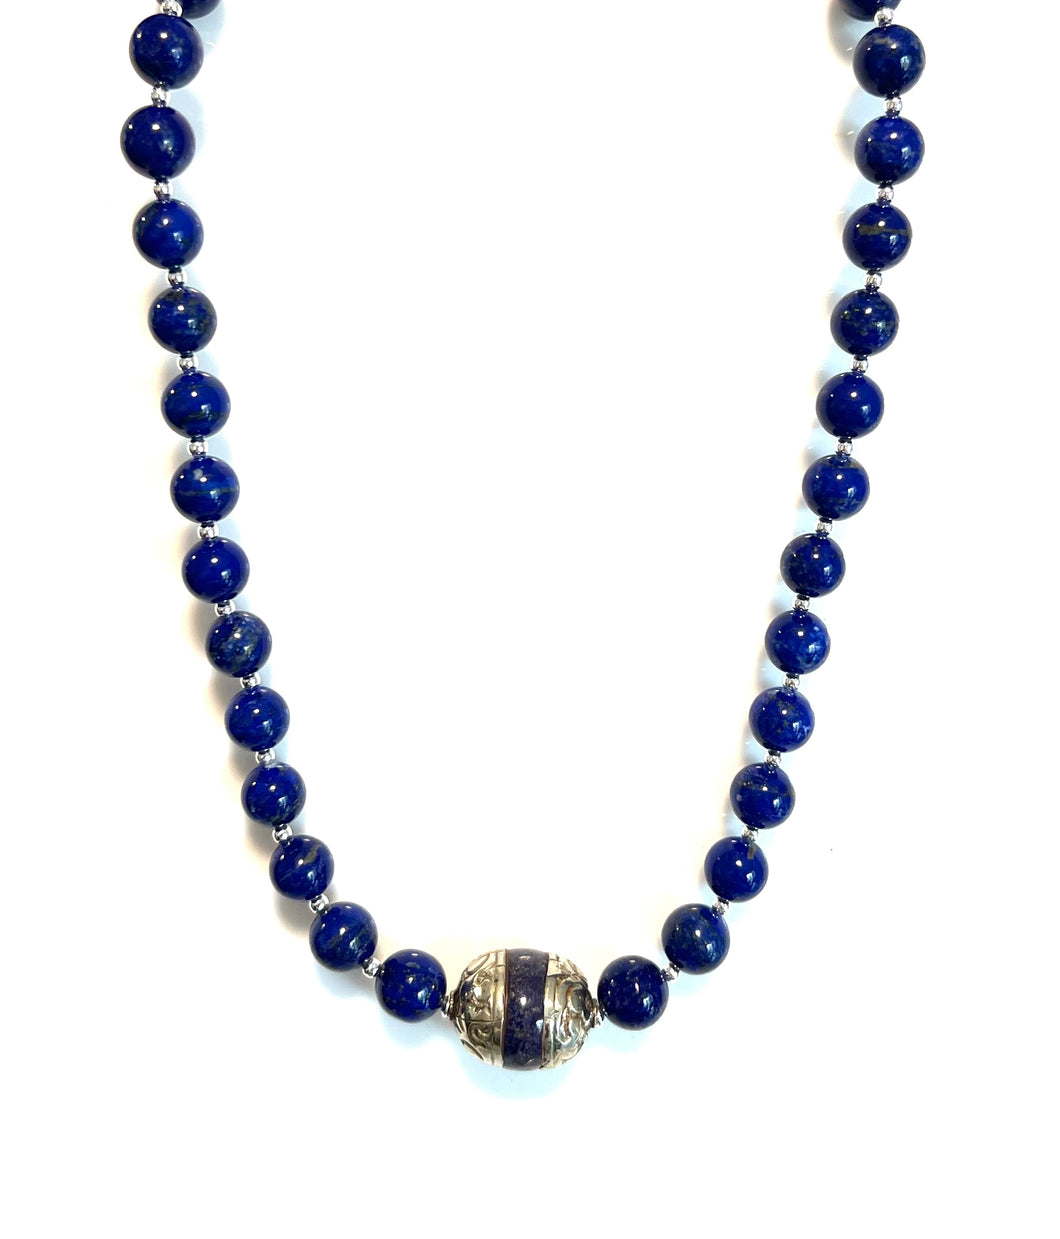 Australian Handmade Blue Necklace with Lapis Lazuli Afghani Bead Centrepiece and Sterling Silver